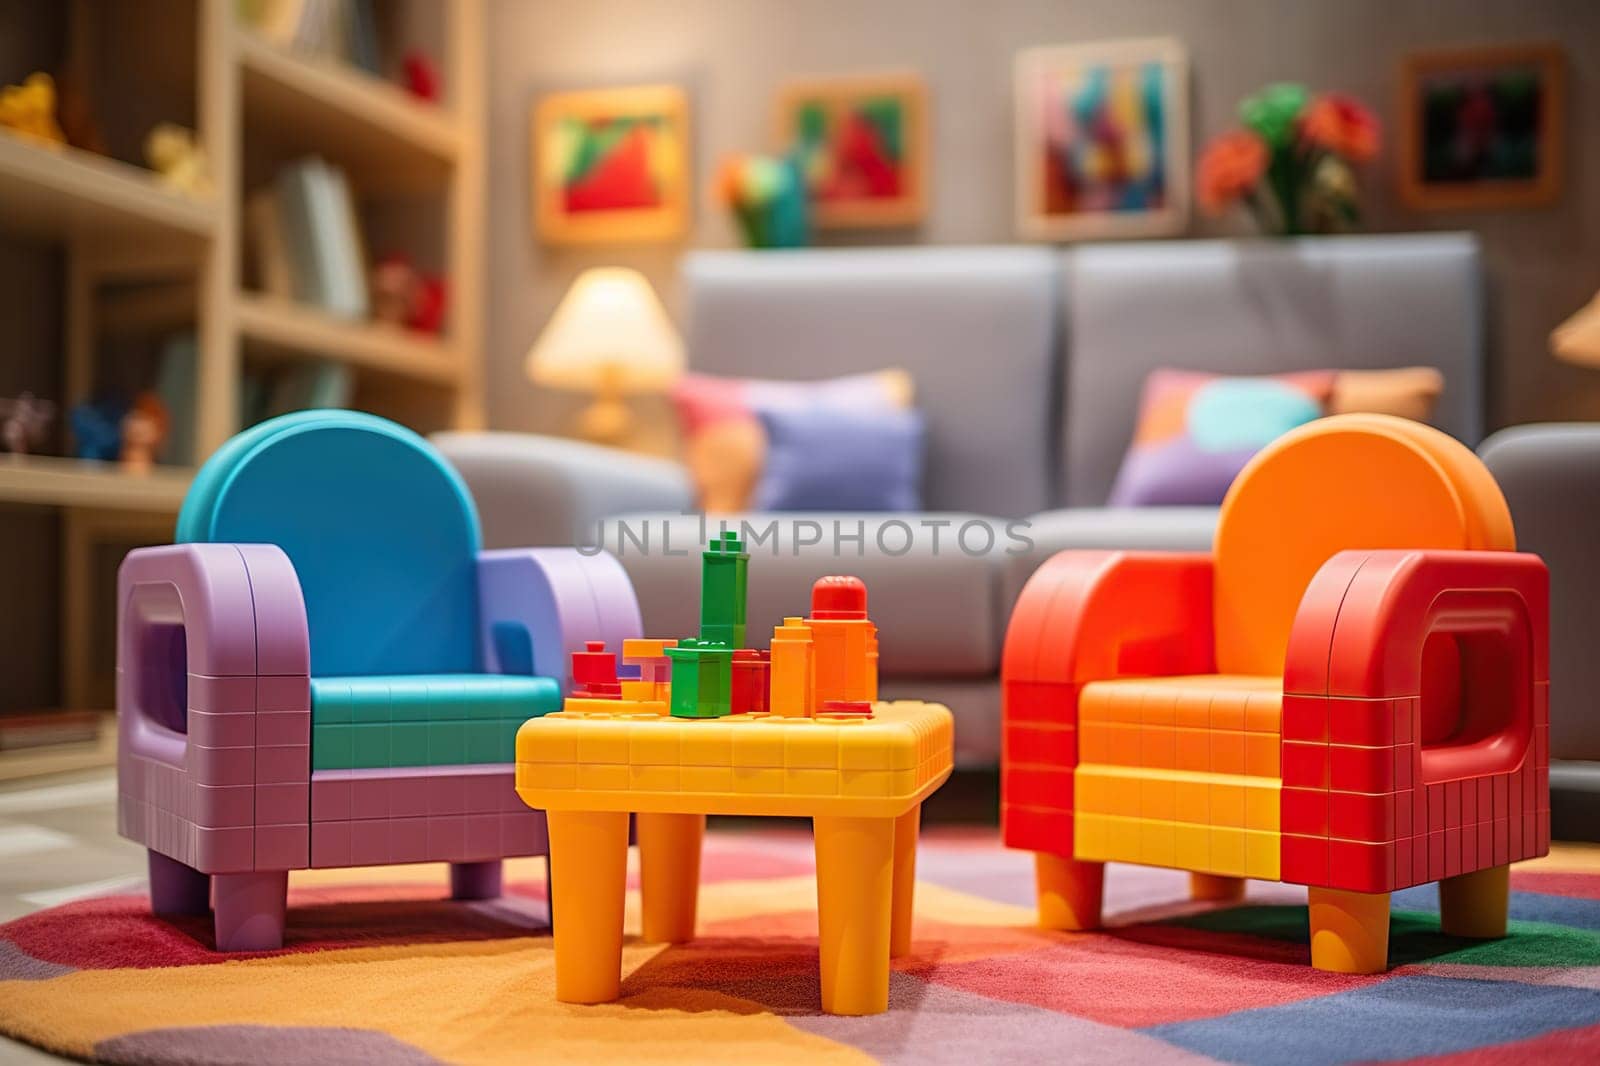 Room interior in cartoon 3D style with an armchair and shelves on the wall. Kids toys.